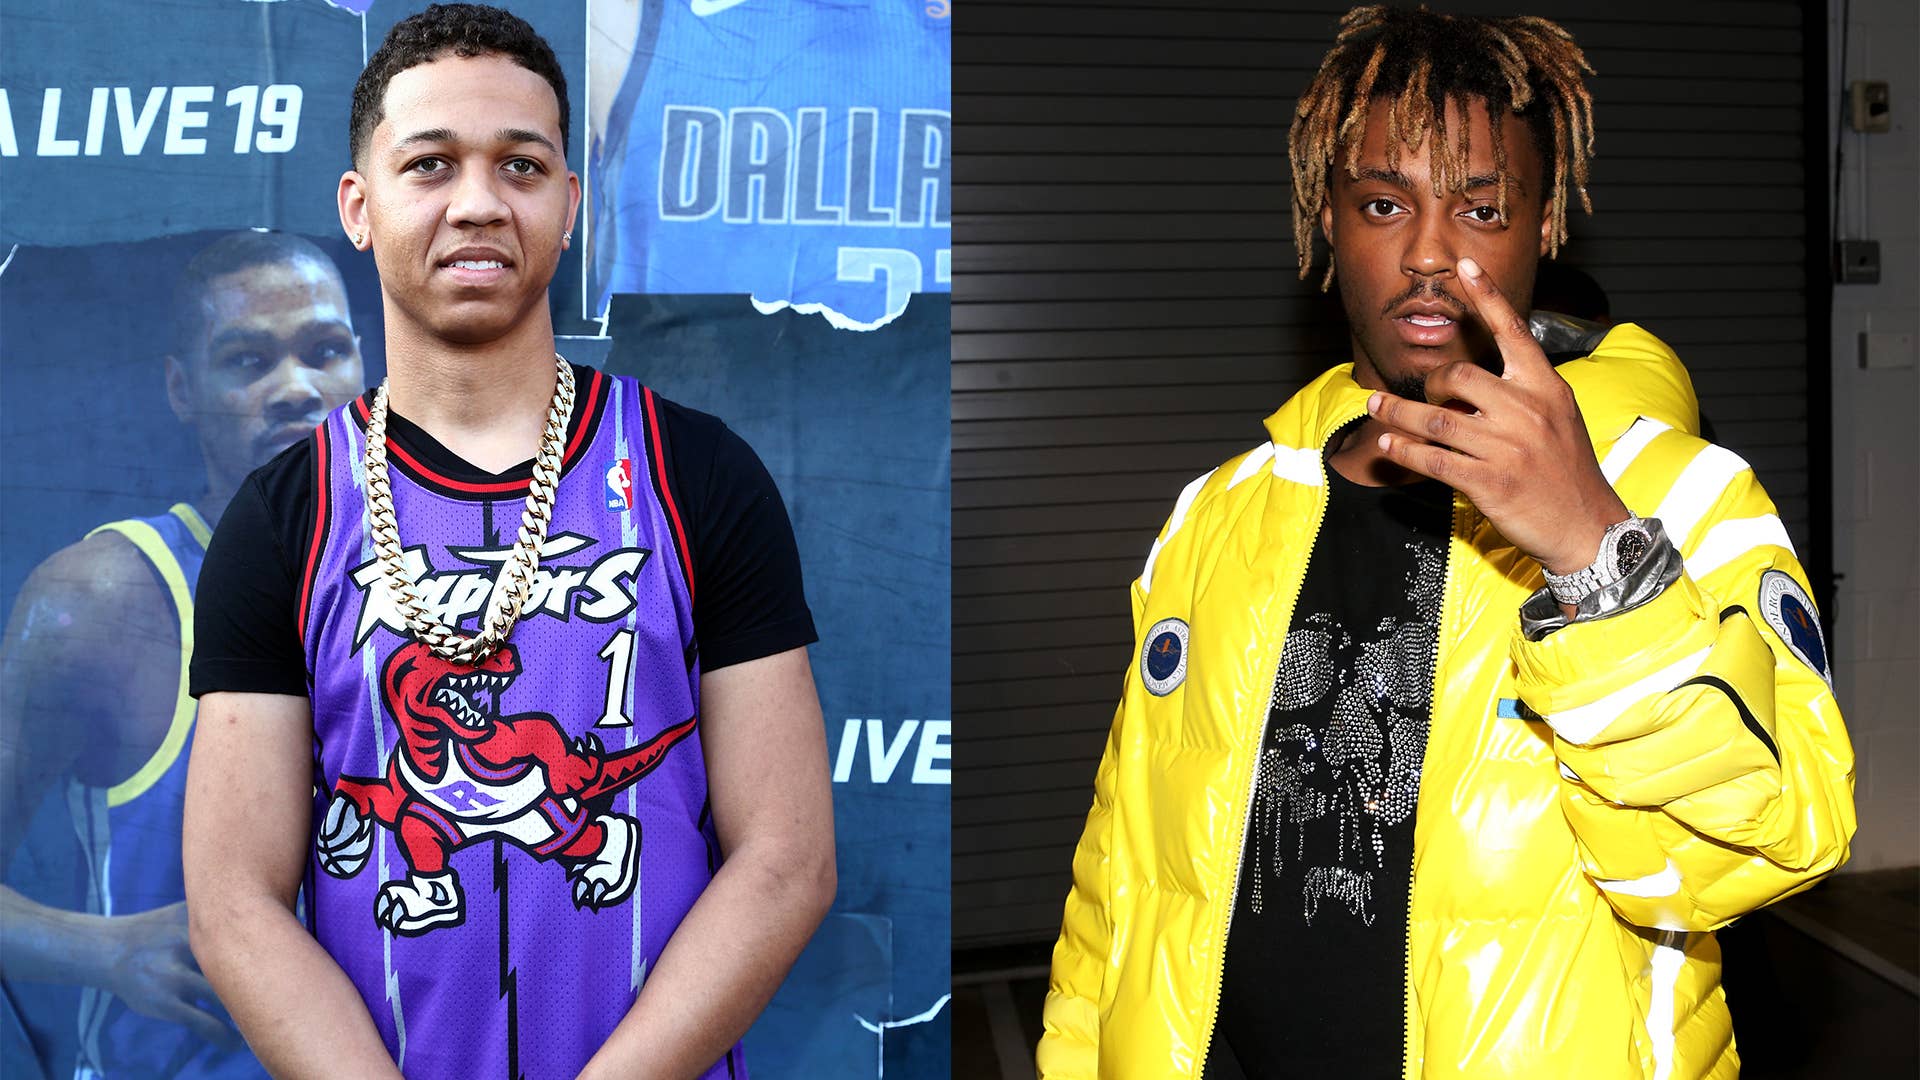 This is a photo of Lil Bibby and Juice WRLD.